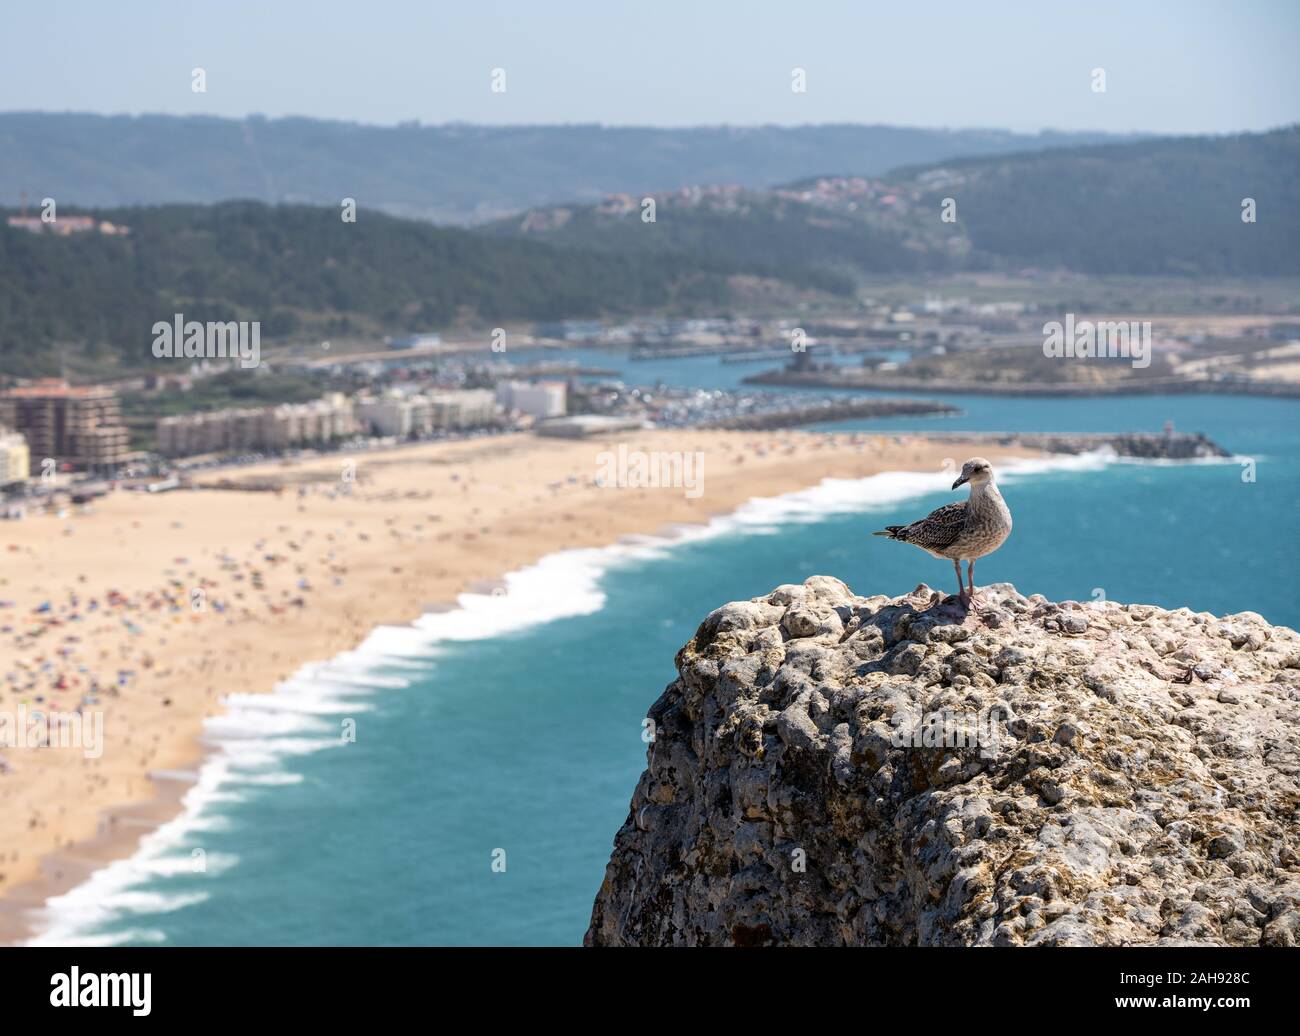 Single seagull on rocky ledge above the crowded beach of Nazare with tourists relaxing on the sand Stock Photo